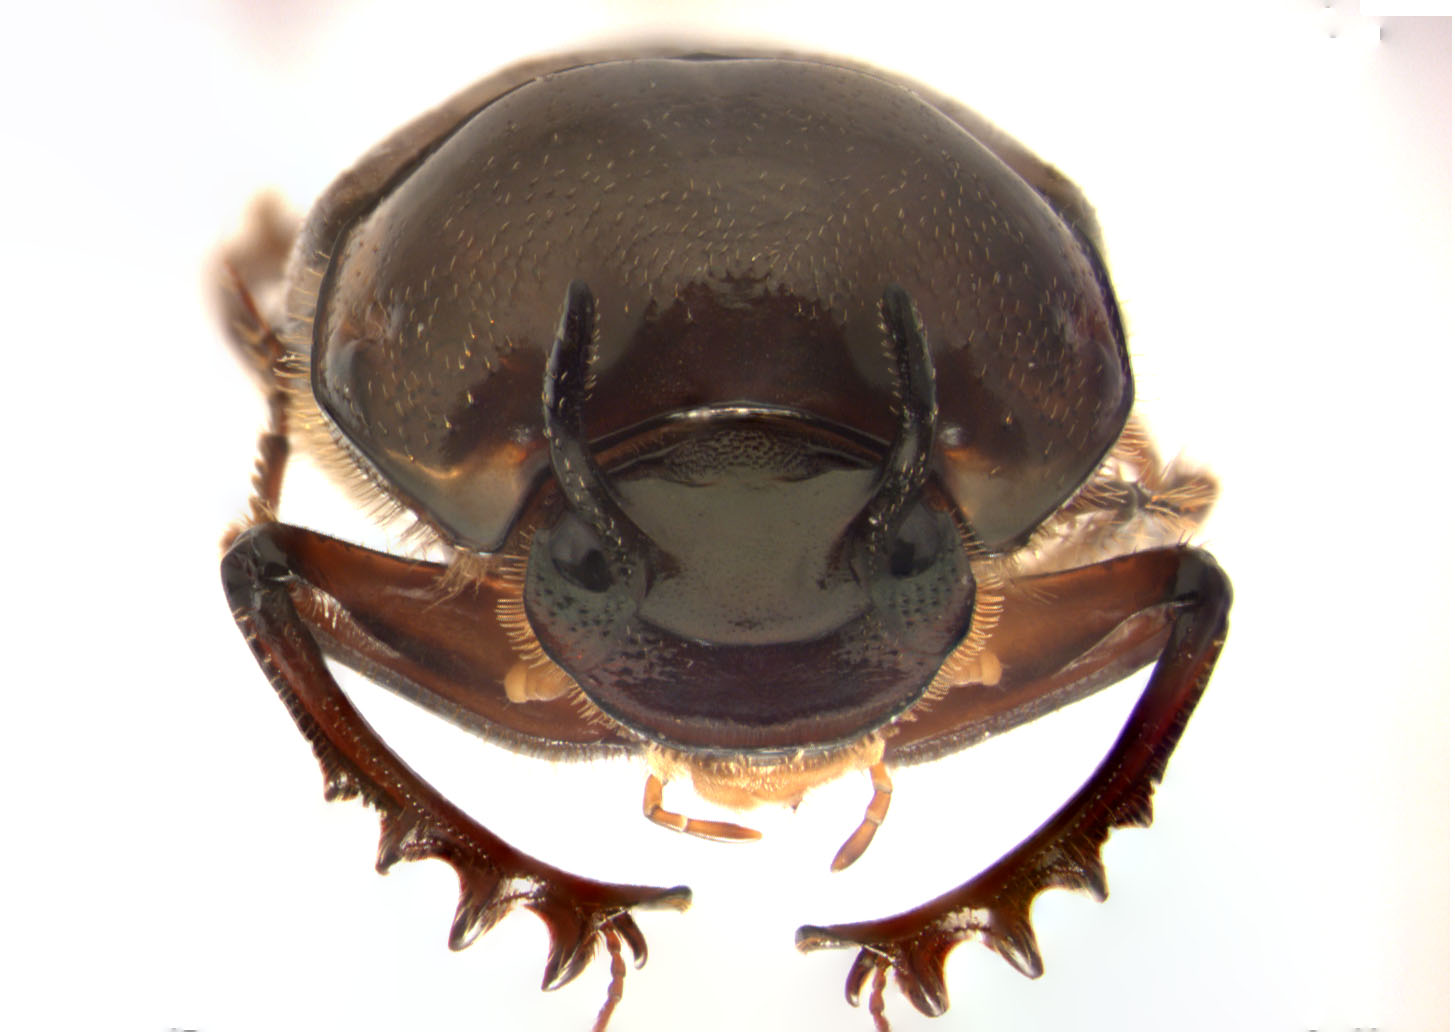 What can horned beetles tell us about the mechanisms of plasticity